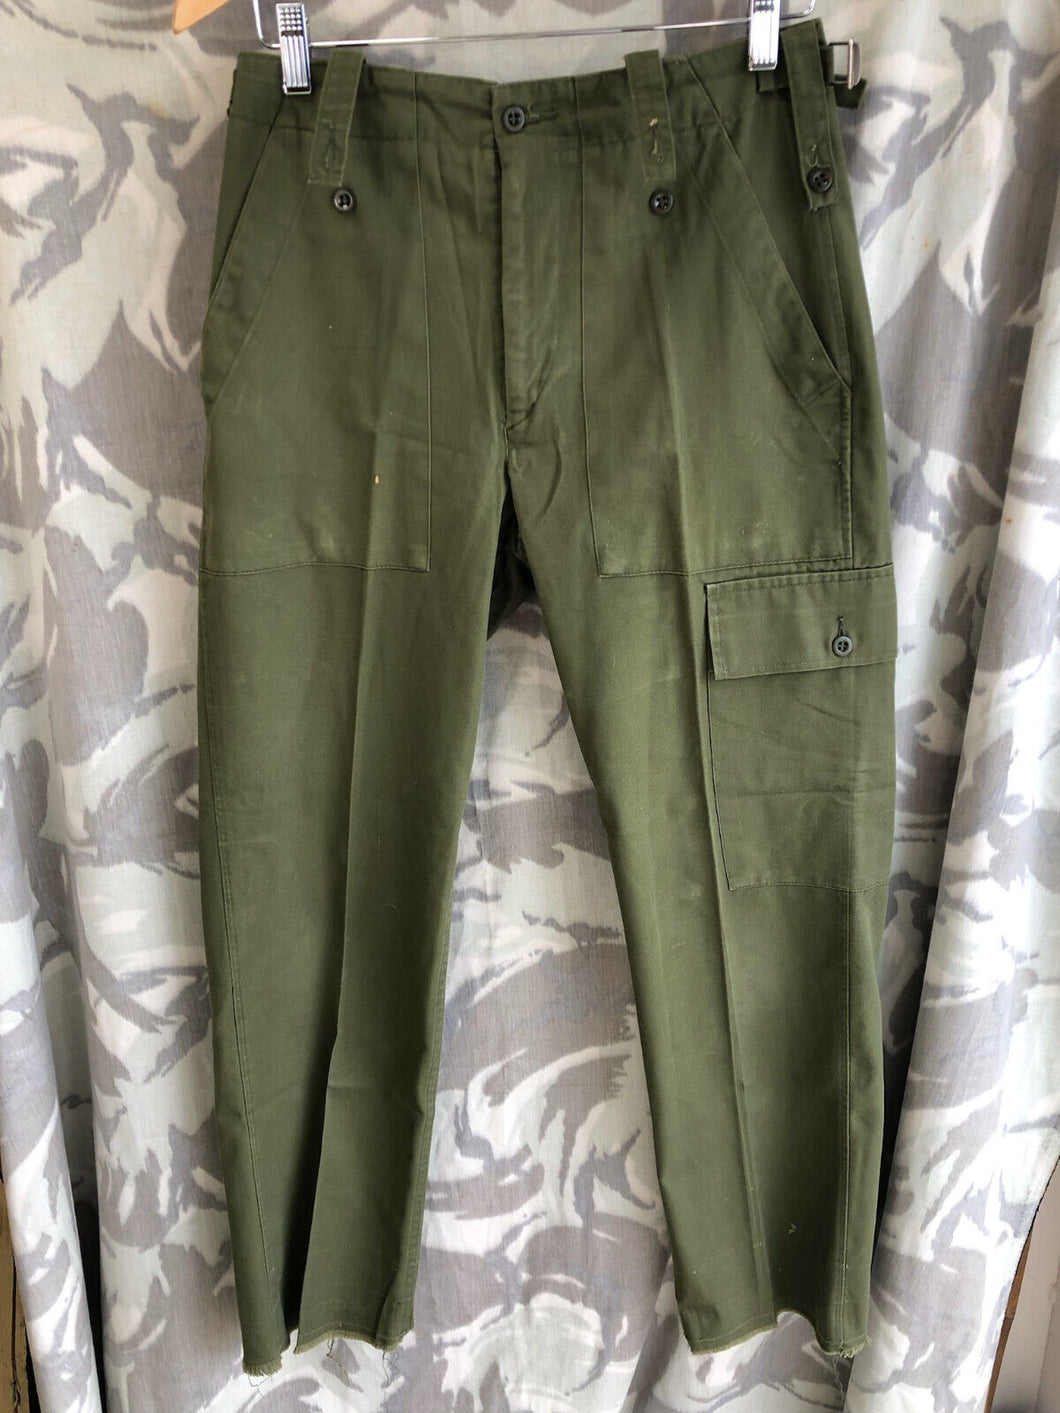 Genuine British Army OD Green Fatigue Combat Trousers - Size 72/76/92